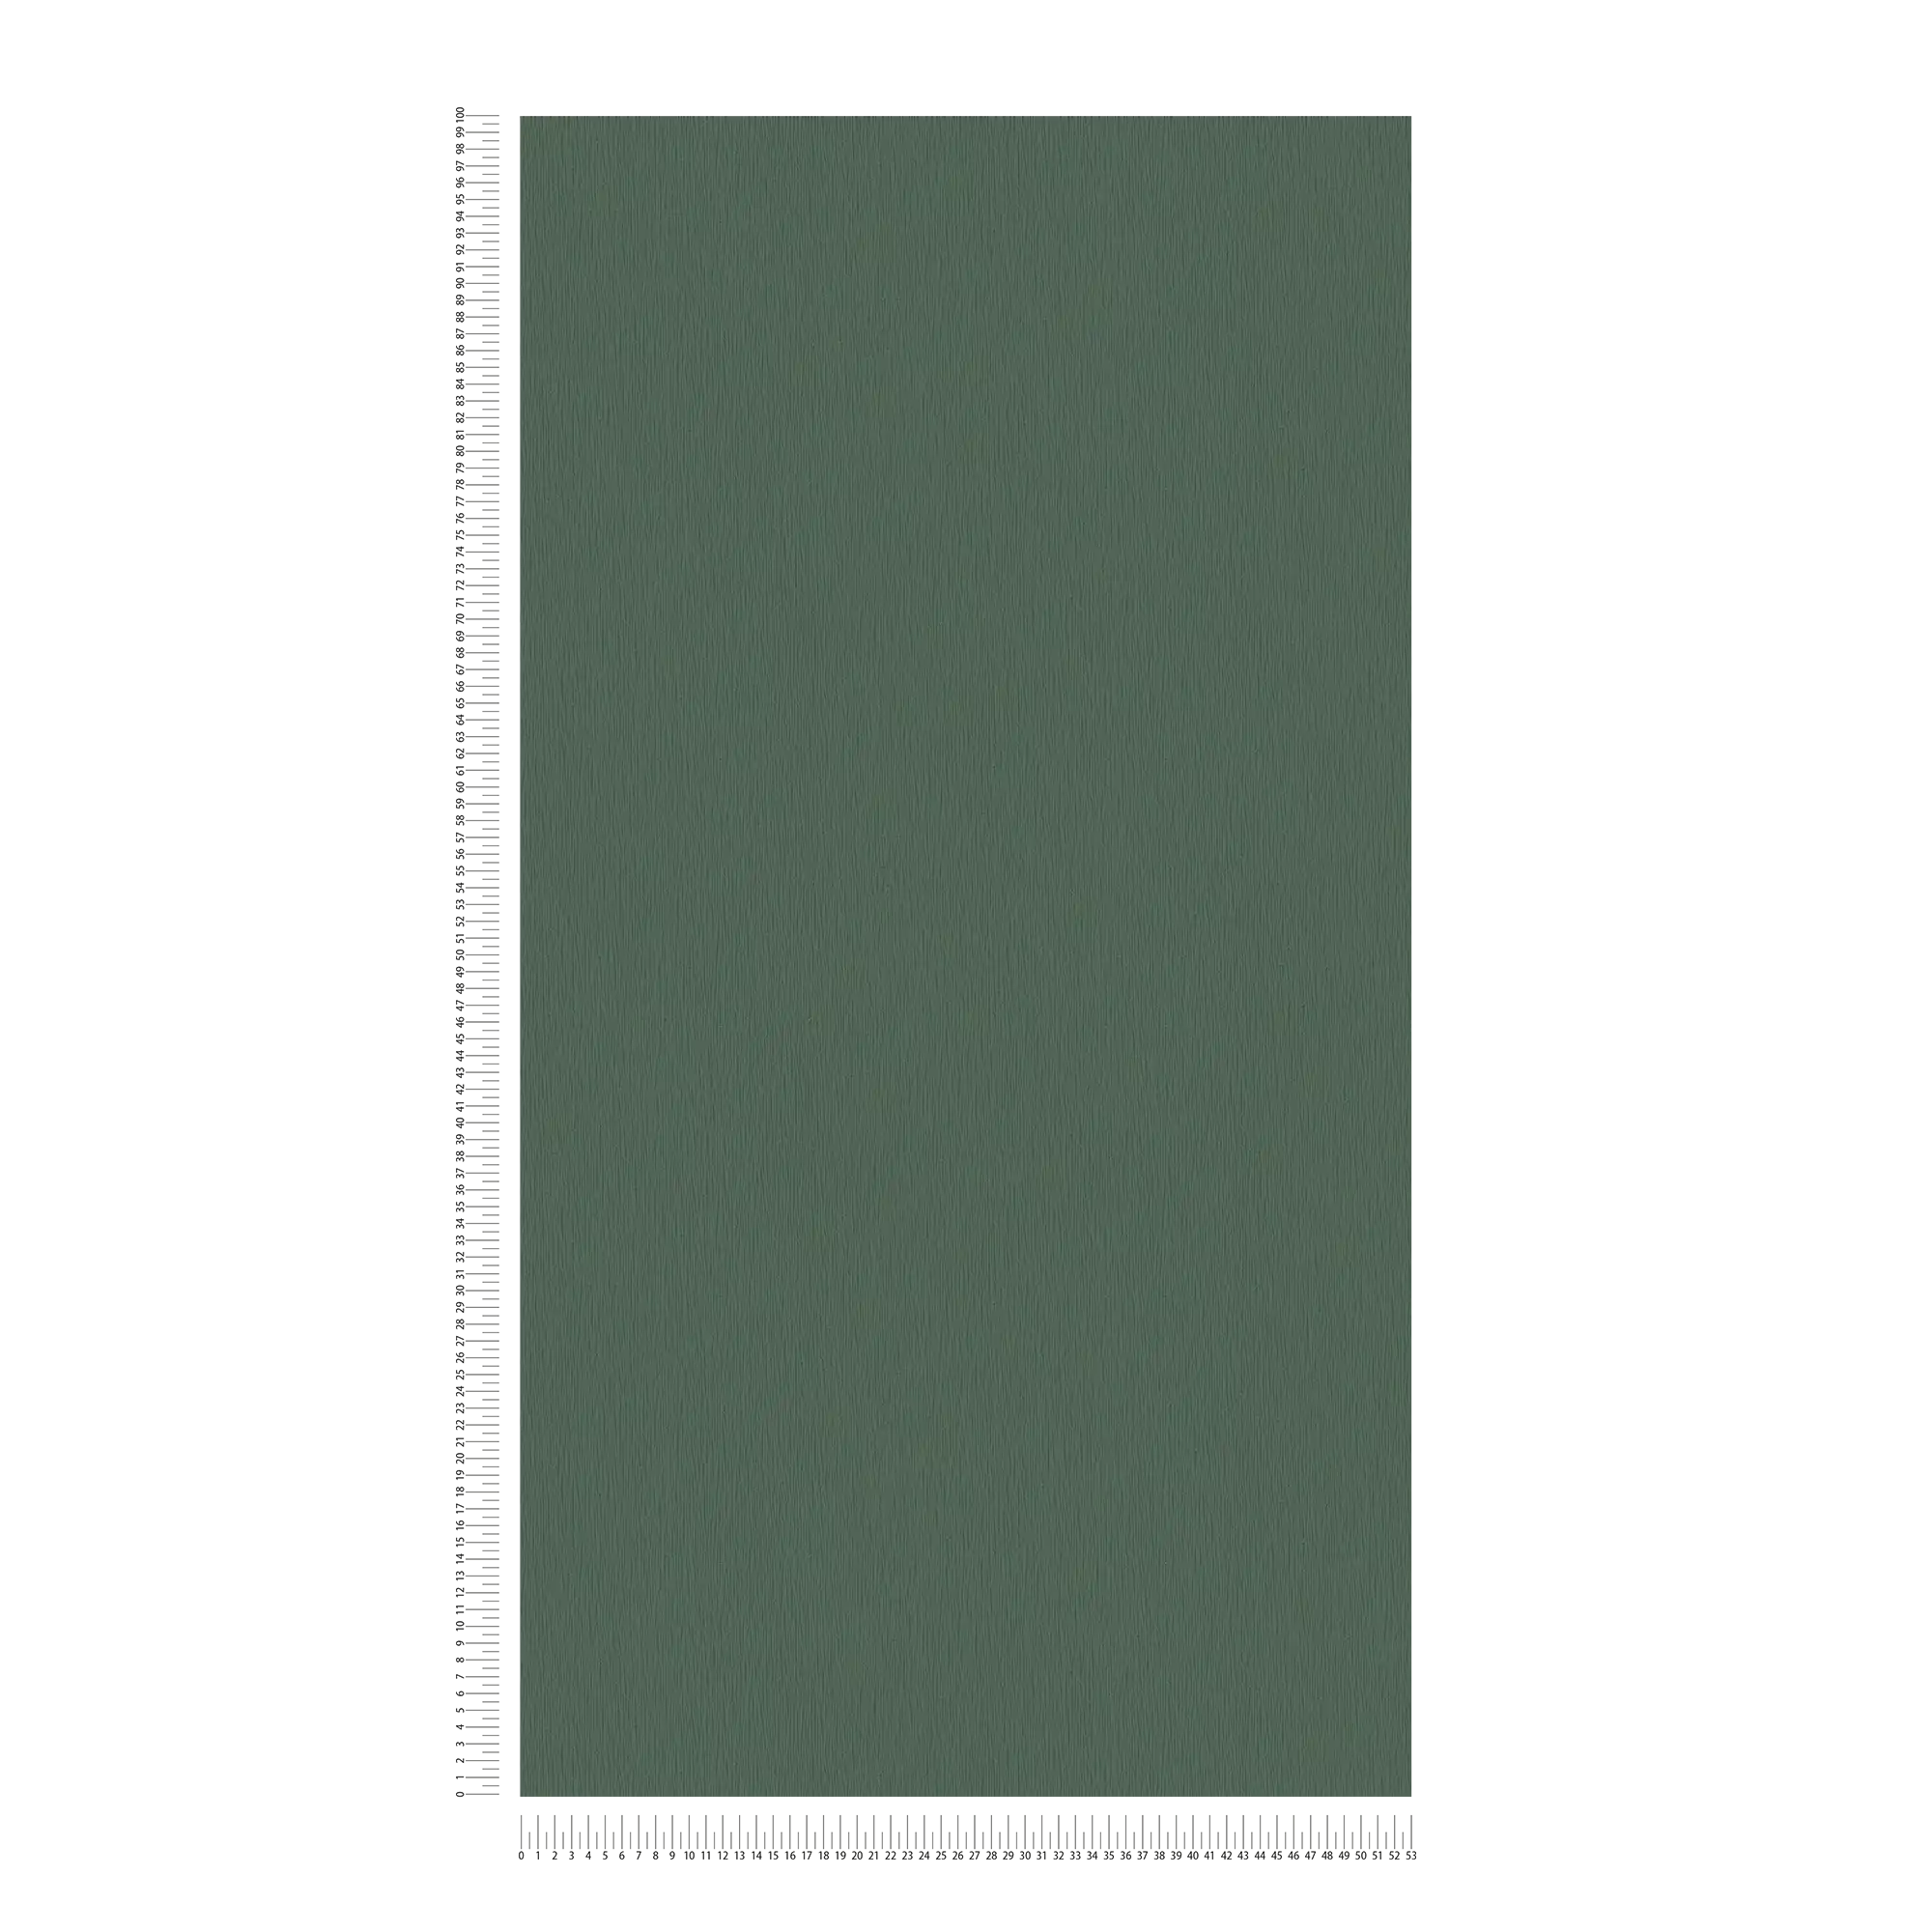             Non-woven wallpaper dark green with natural tone-on-tone texture pattern
        